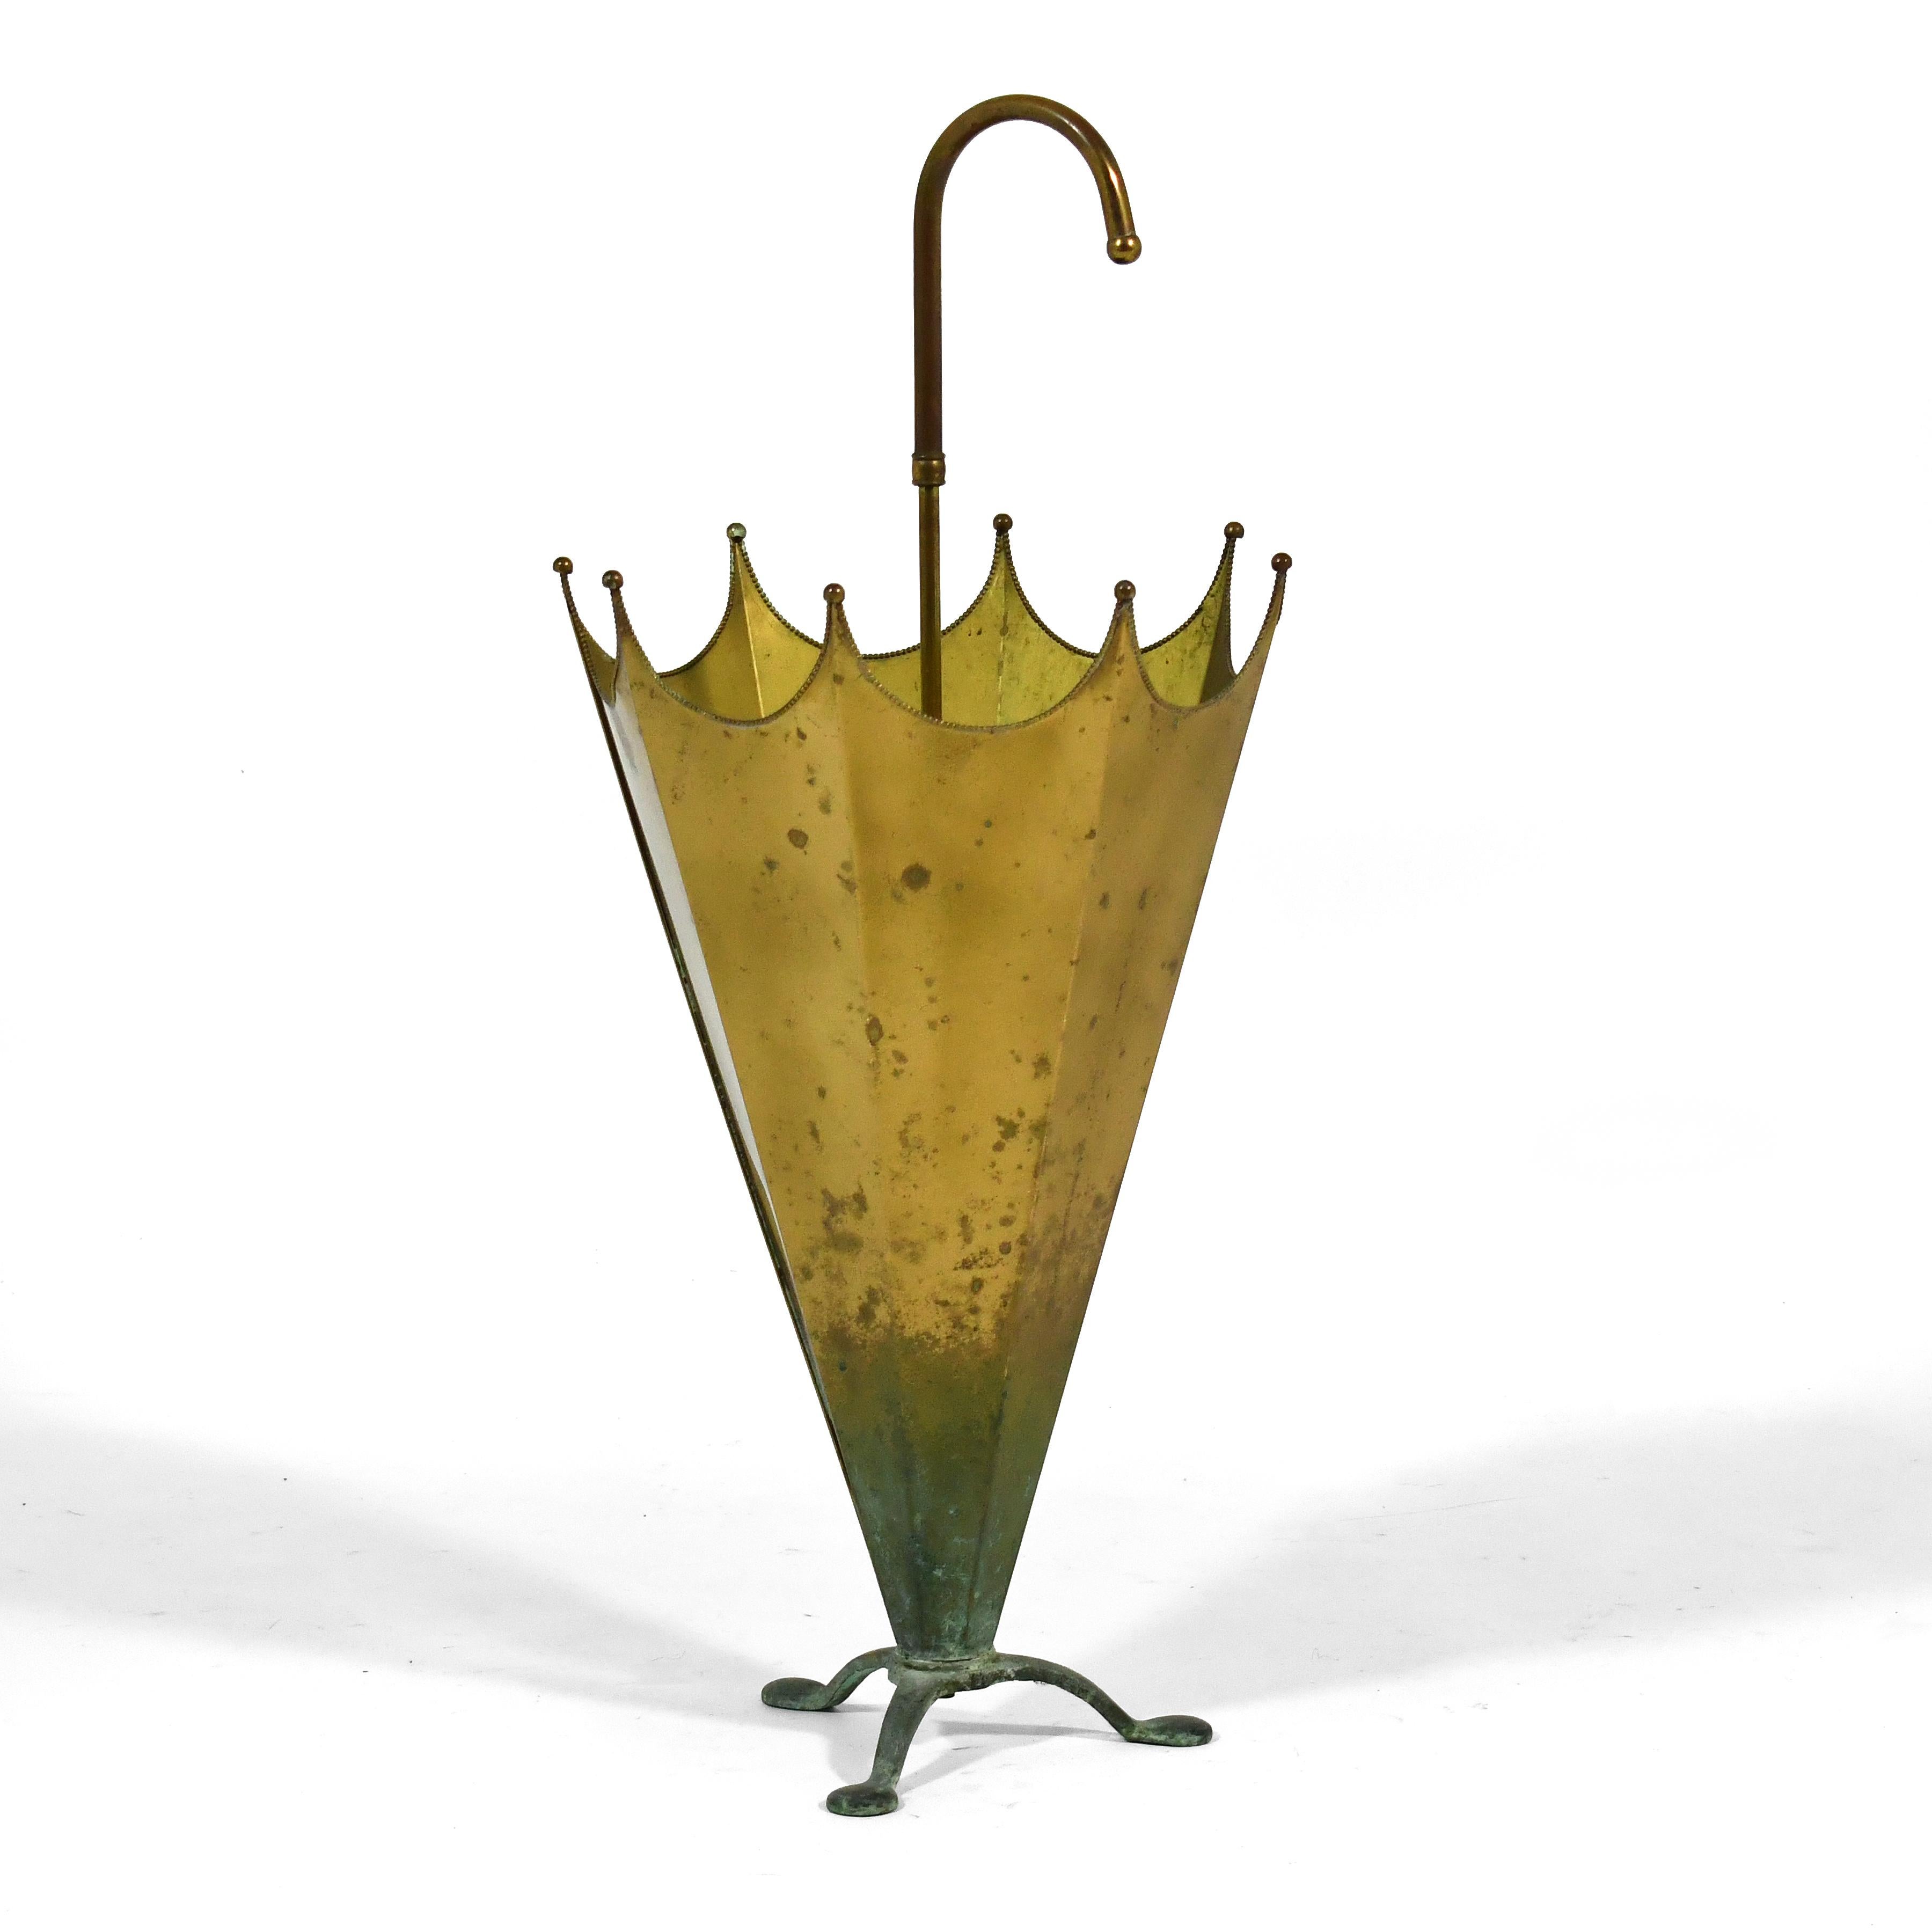 This lovely vintage brass umbrella stand is in the form of an umbrella. The rich patina is a testament to it's years of age and use.